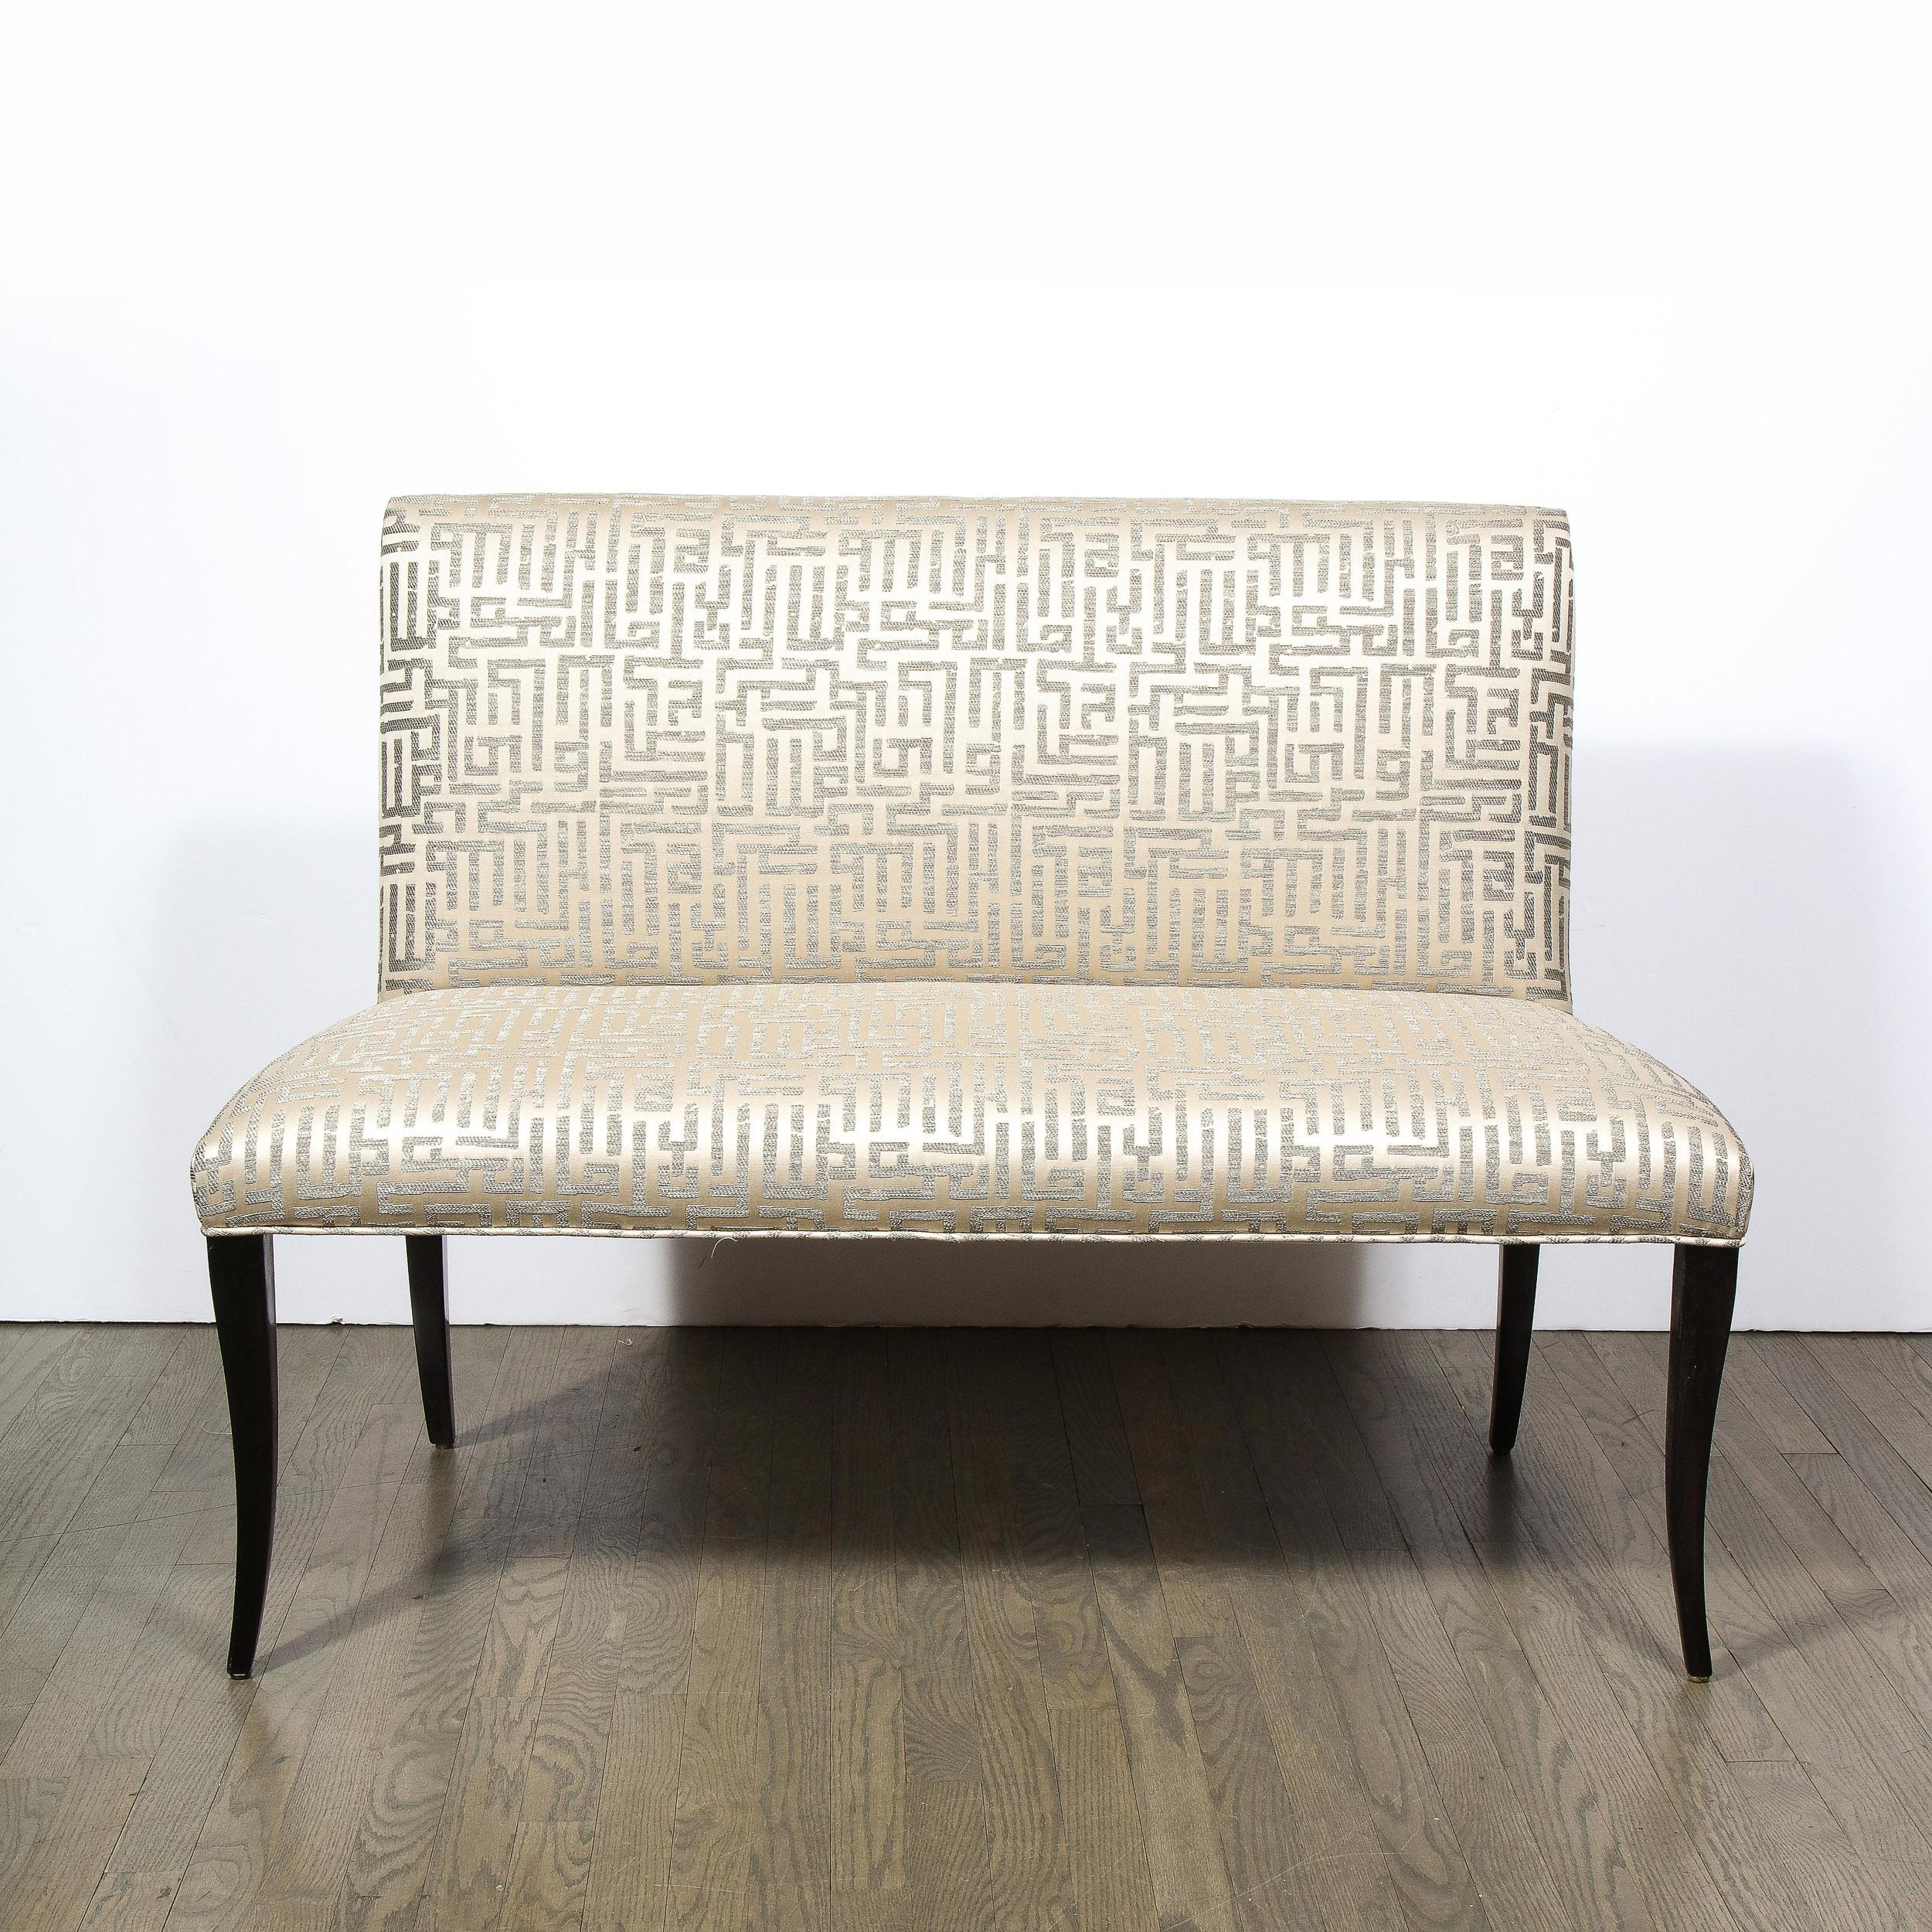 This impeccably styled piece is made from ebonized walnut featuring poised, saber legs and relaxed back. The bench has been newly reupholstered in a gorgeous, Holly Hunt ”Pale Silver” fabric with allover key fret pattern. A fine addition with